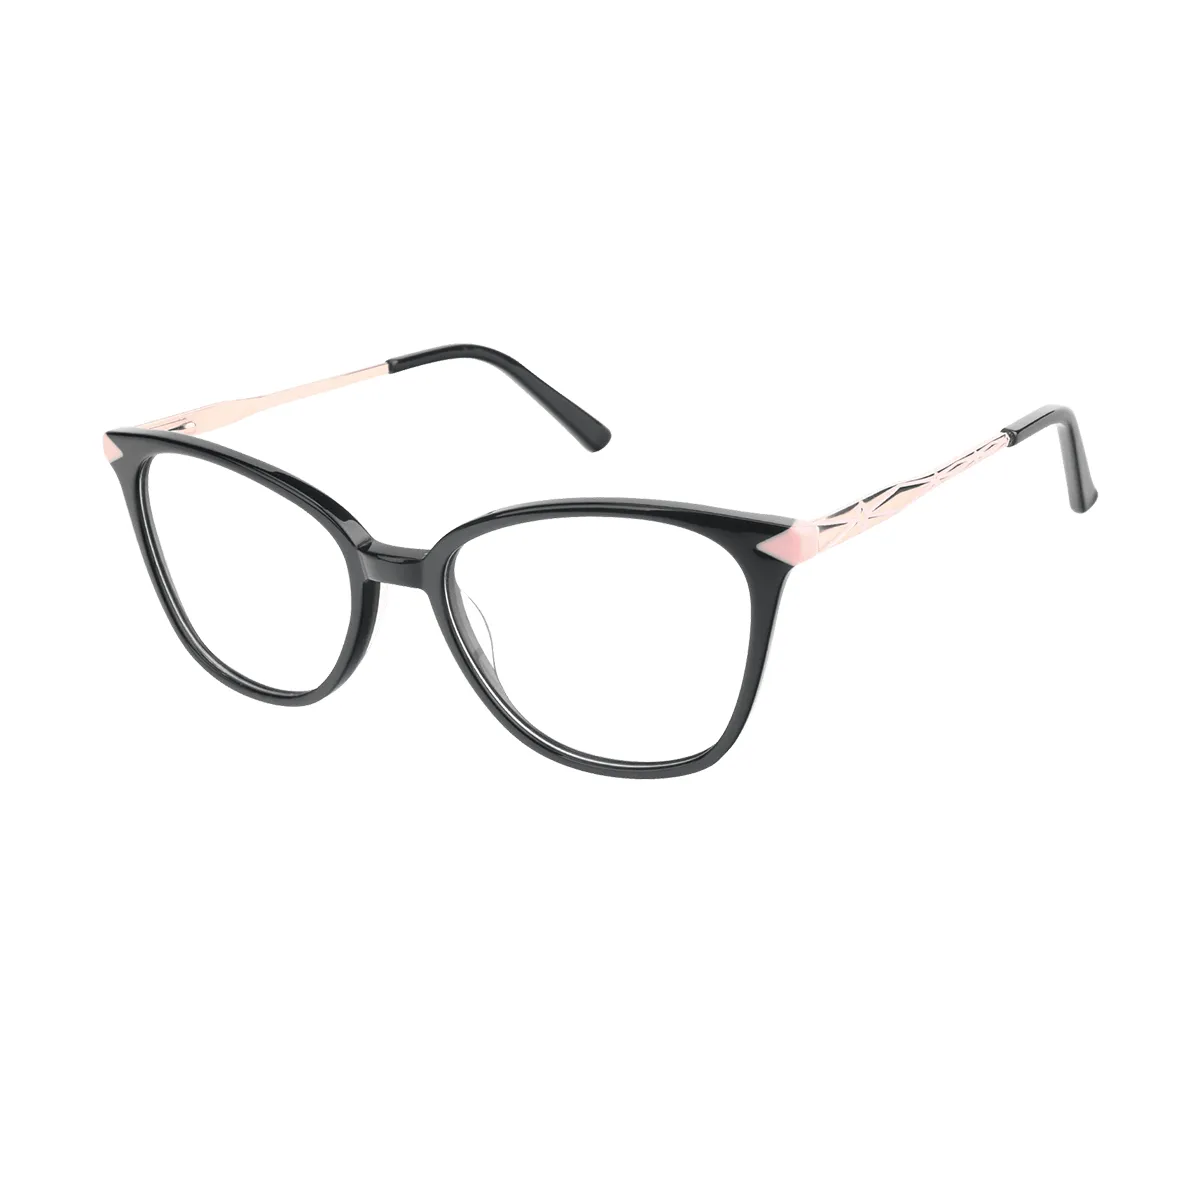 Fashion Square Pink Reading Glasses for Women